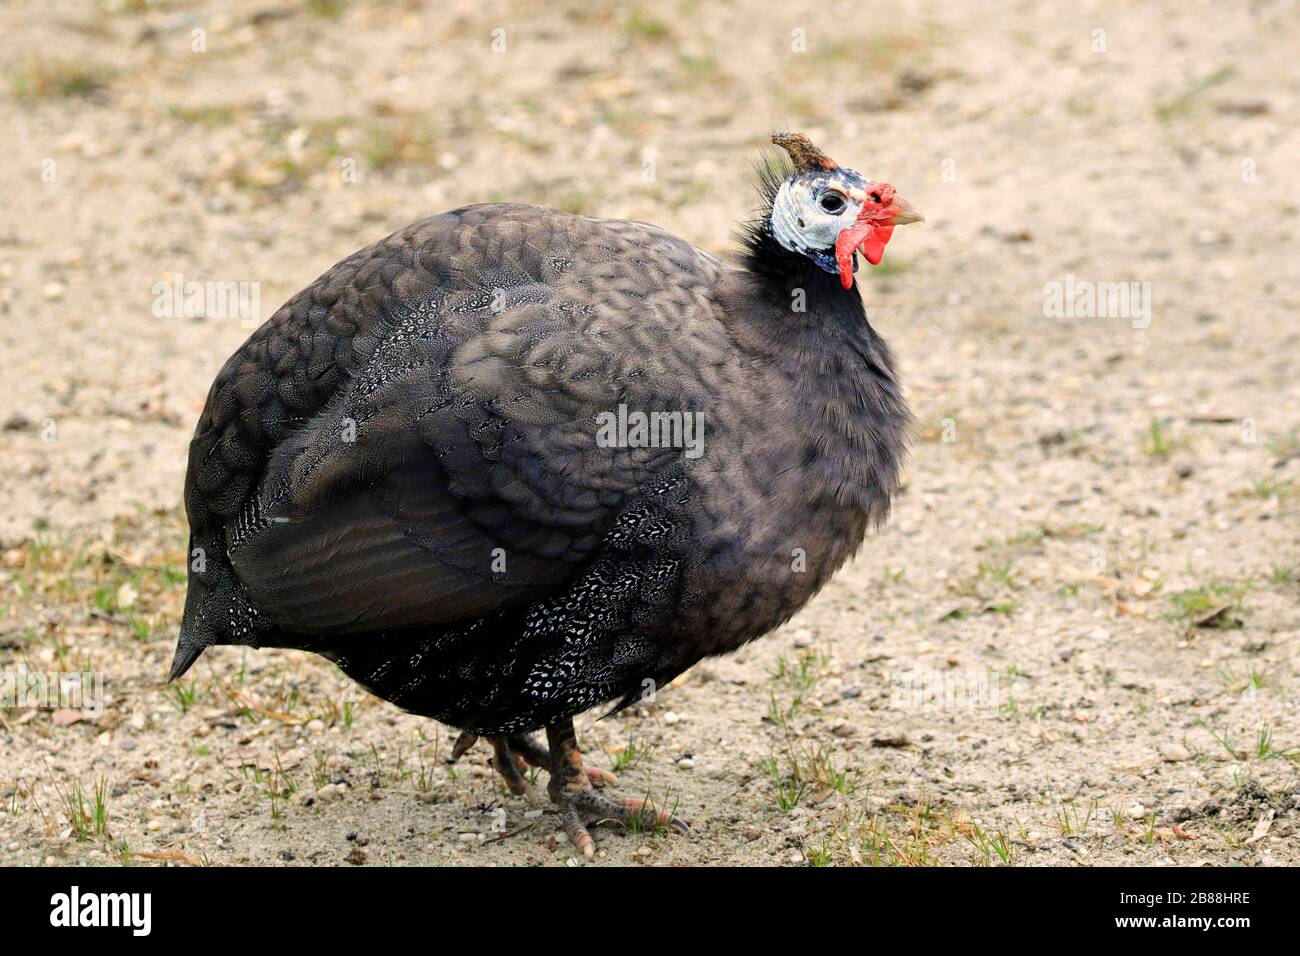 Helmeted Guineafowl, Numida meleagris. Cape May County Park & Zoo, Cape May Courthouse, New Jersey, USA Stockfoto